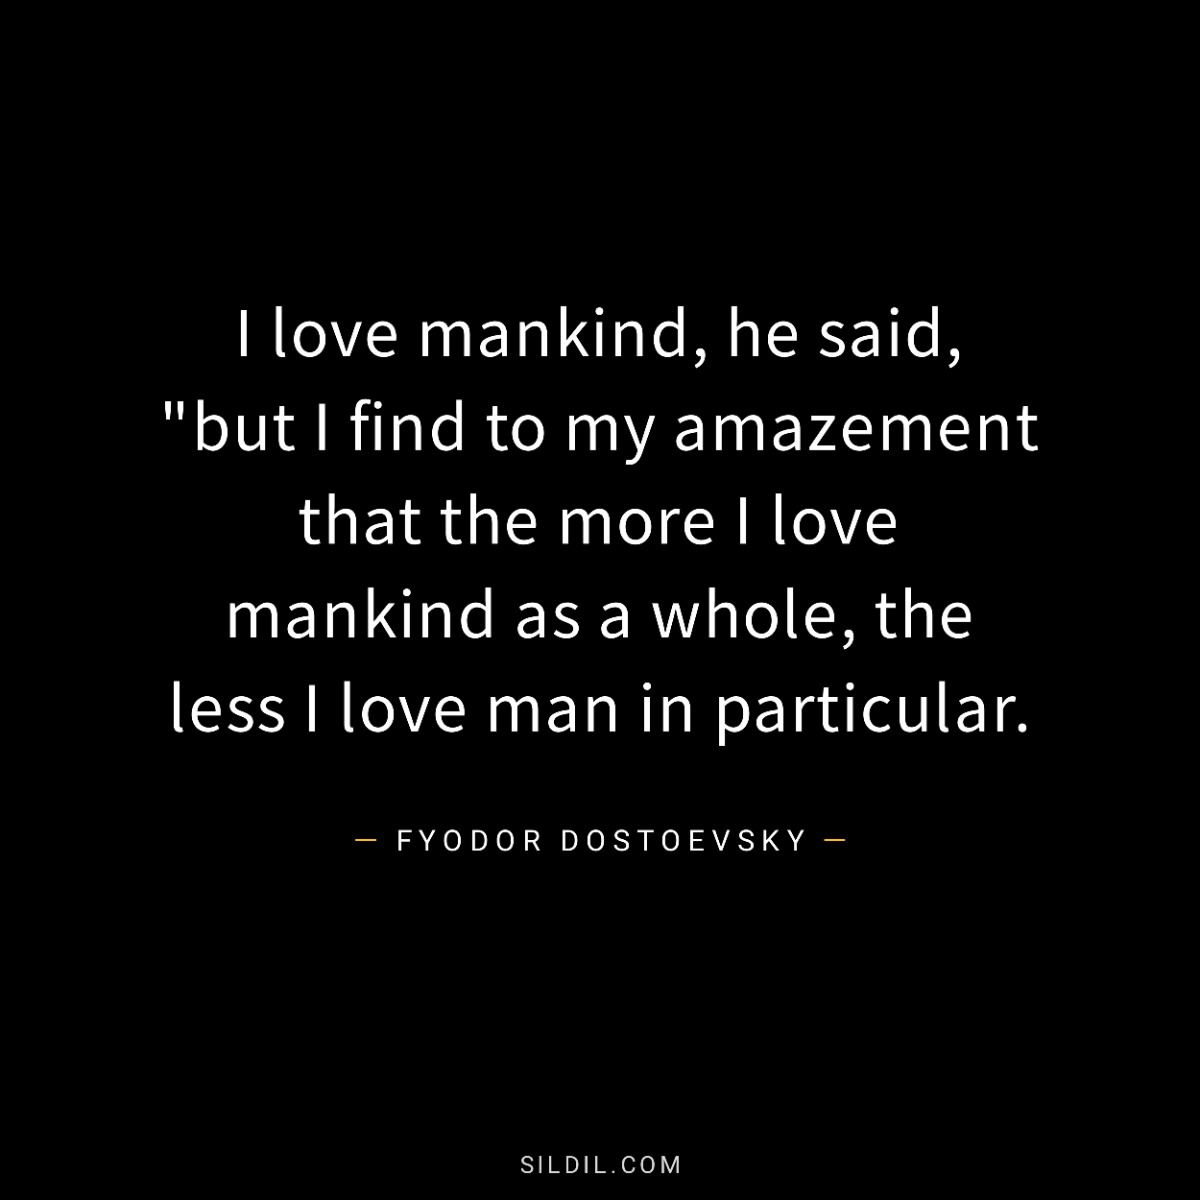 I love mankind, he said, &quote;but I find to my amazement that the more I love mankind as a whole, the less I love man in particular.